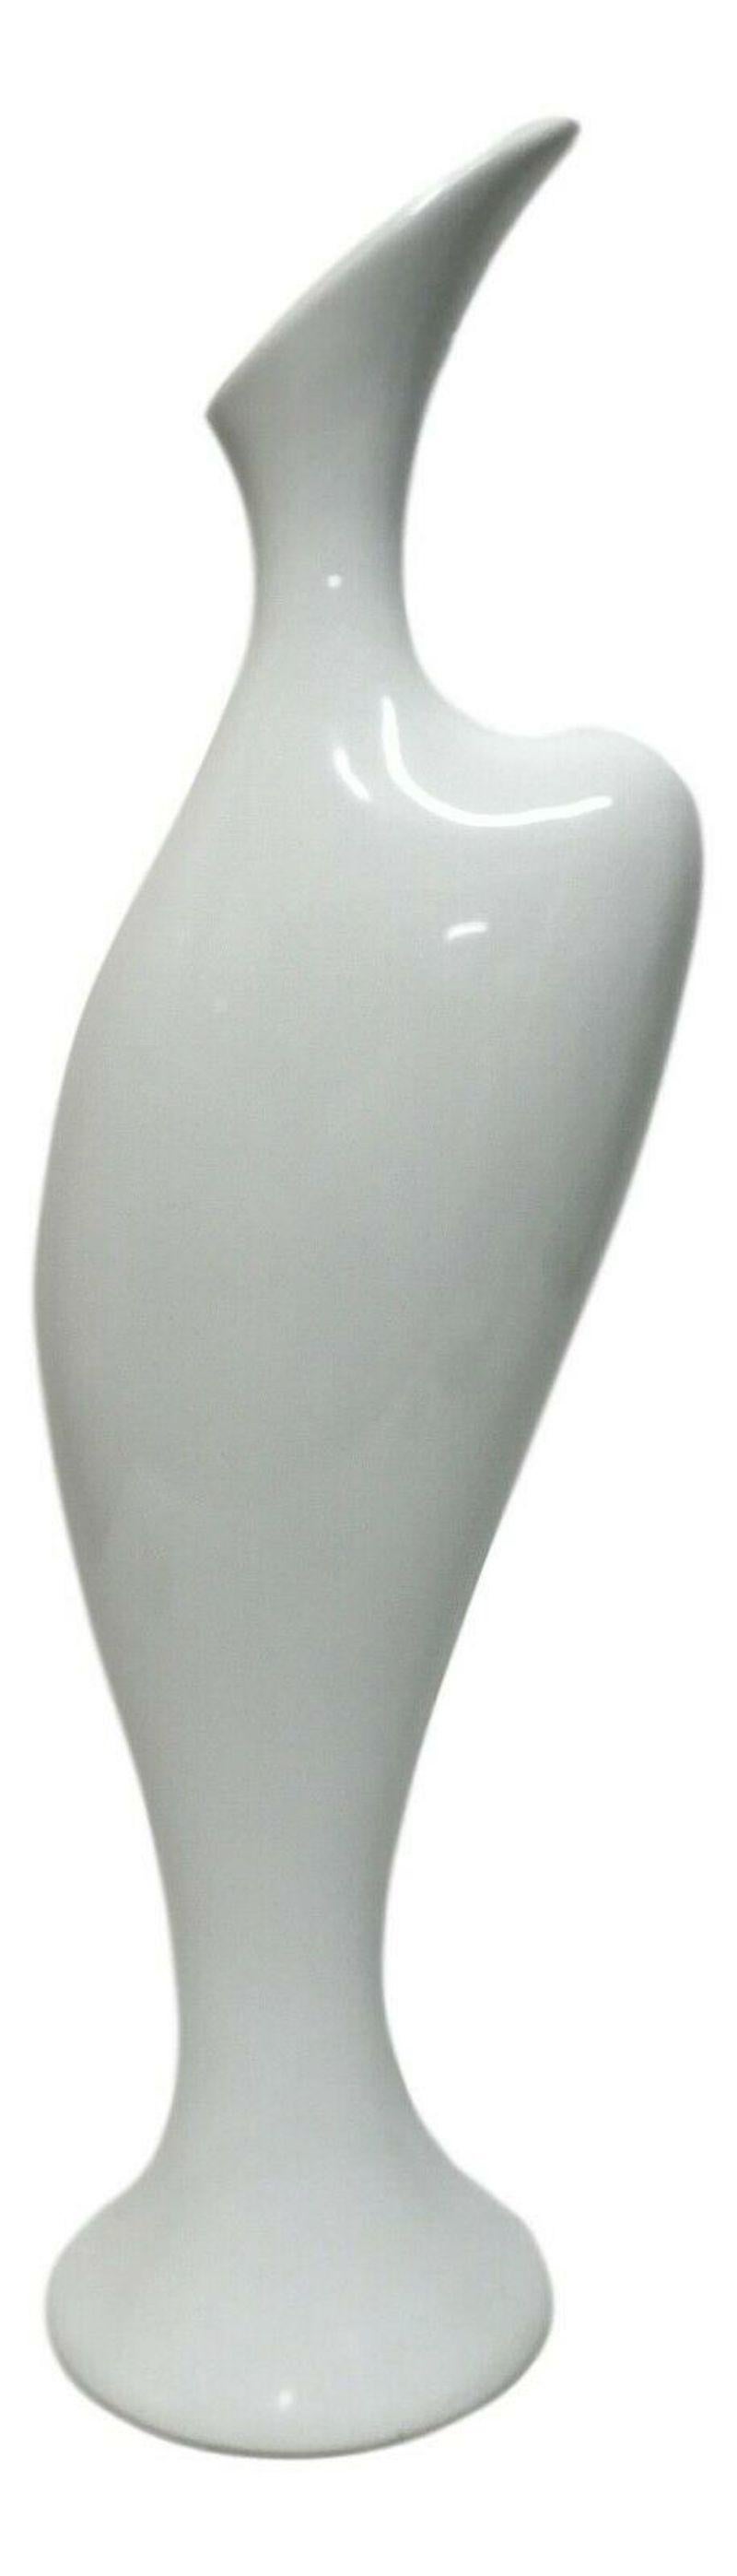 Late 20th Century Vintage Ceramic Vase with a Slender and Harmonious Shape, 1970s For Sale